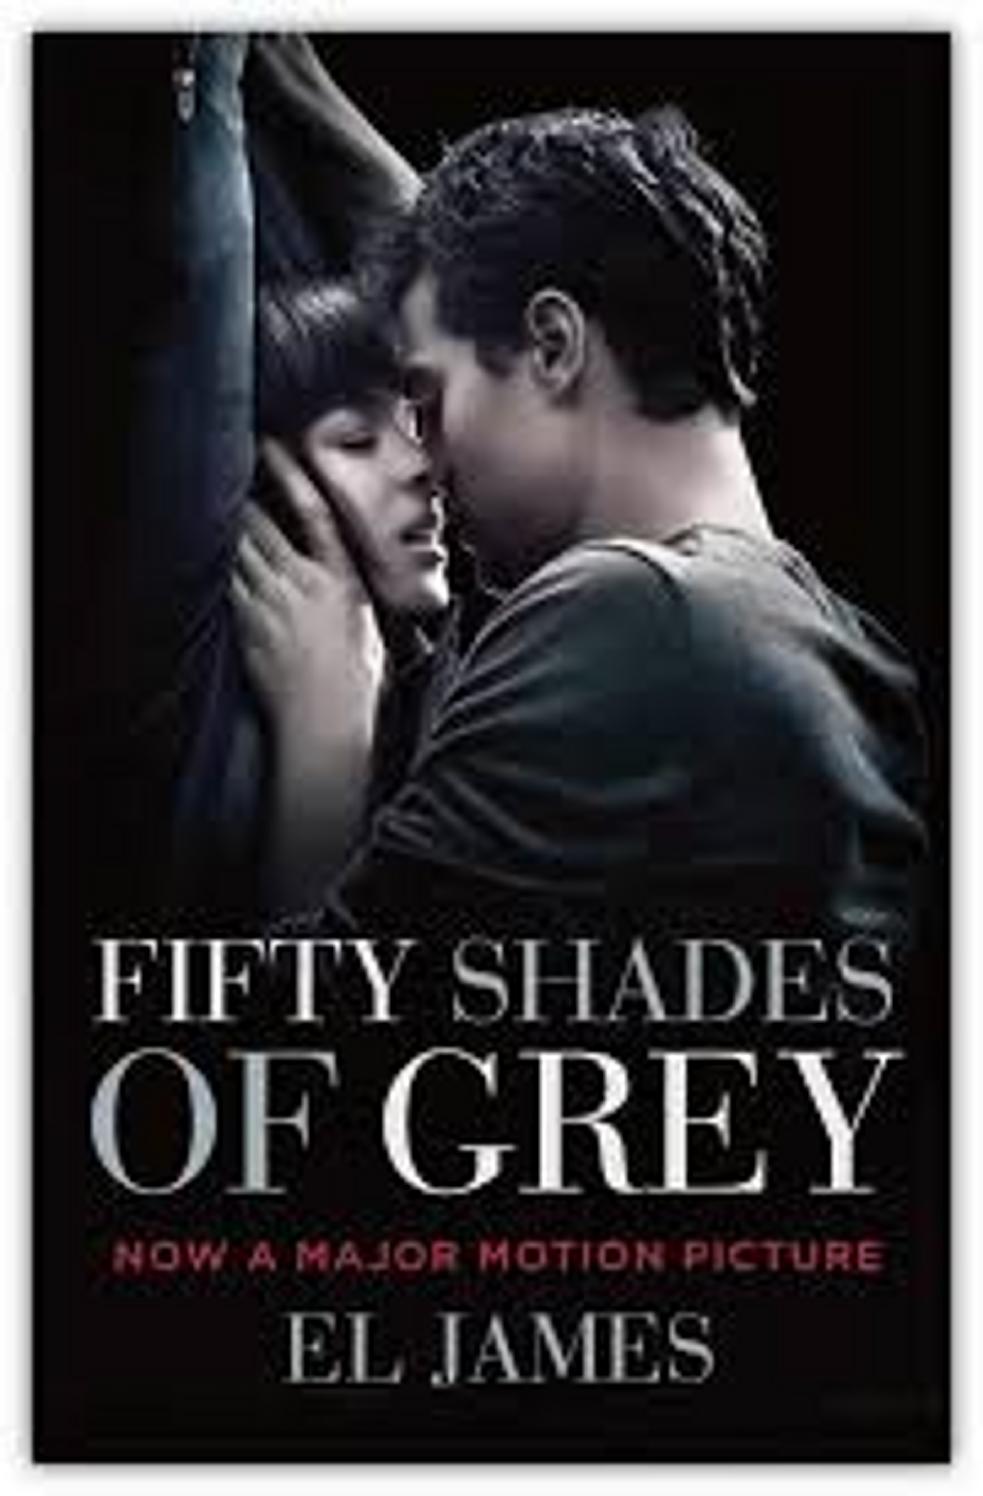 FIFTY SHADES OF GREY (Film Tie-in)